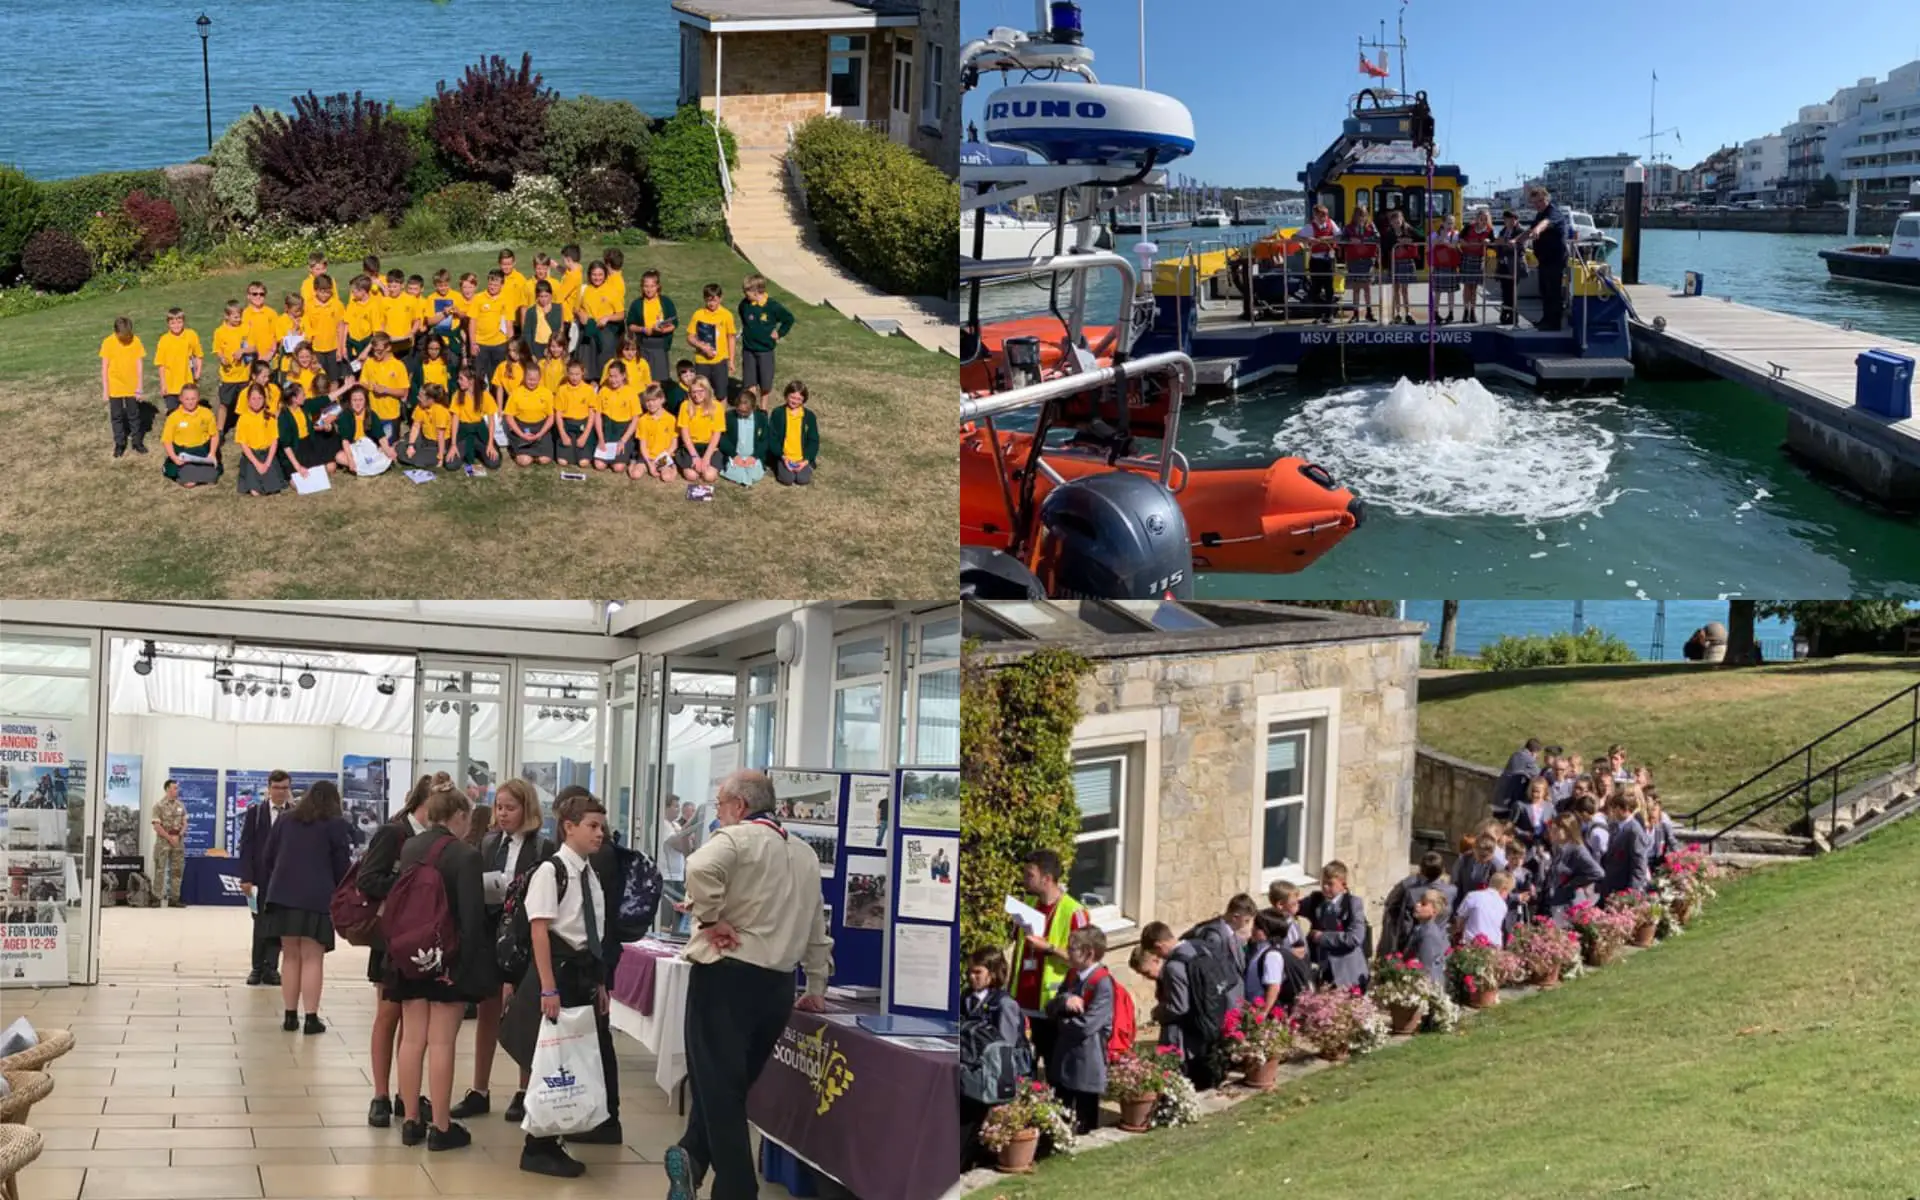 Photos from previous events showing school children at the Yacht Squadron